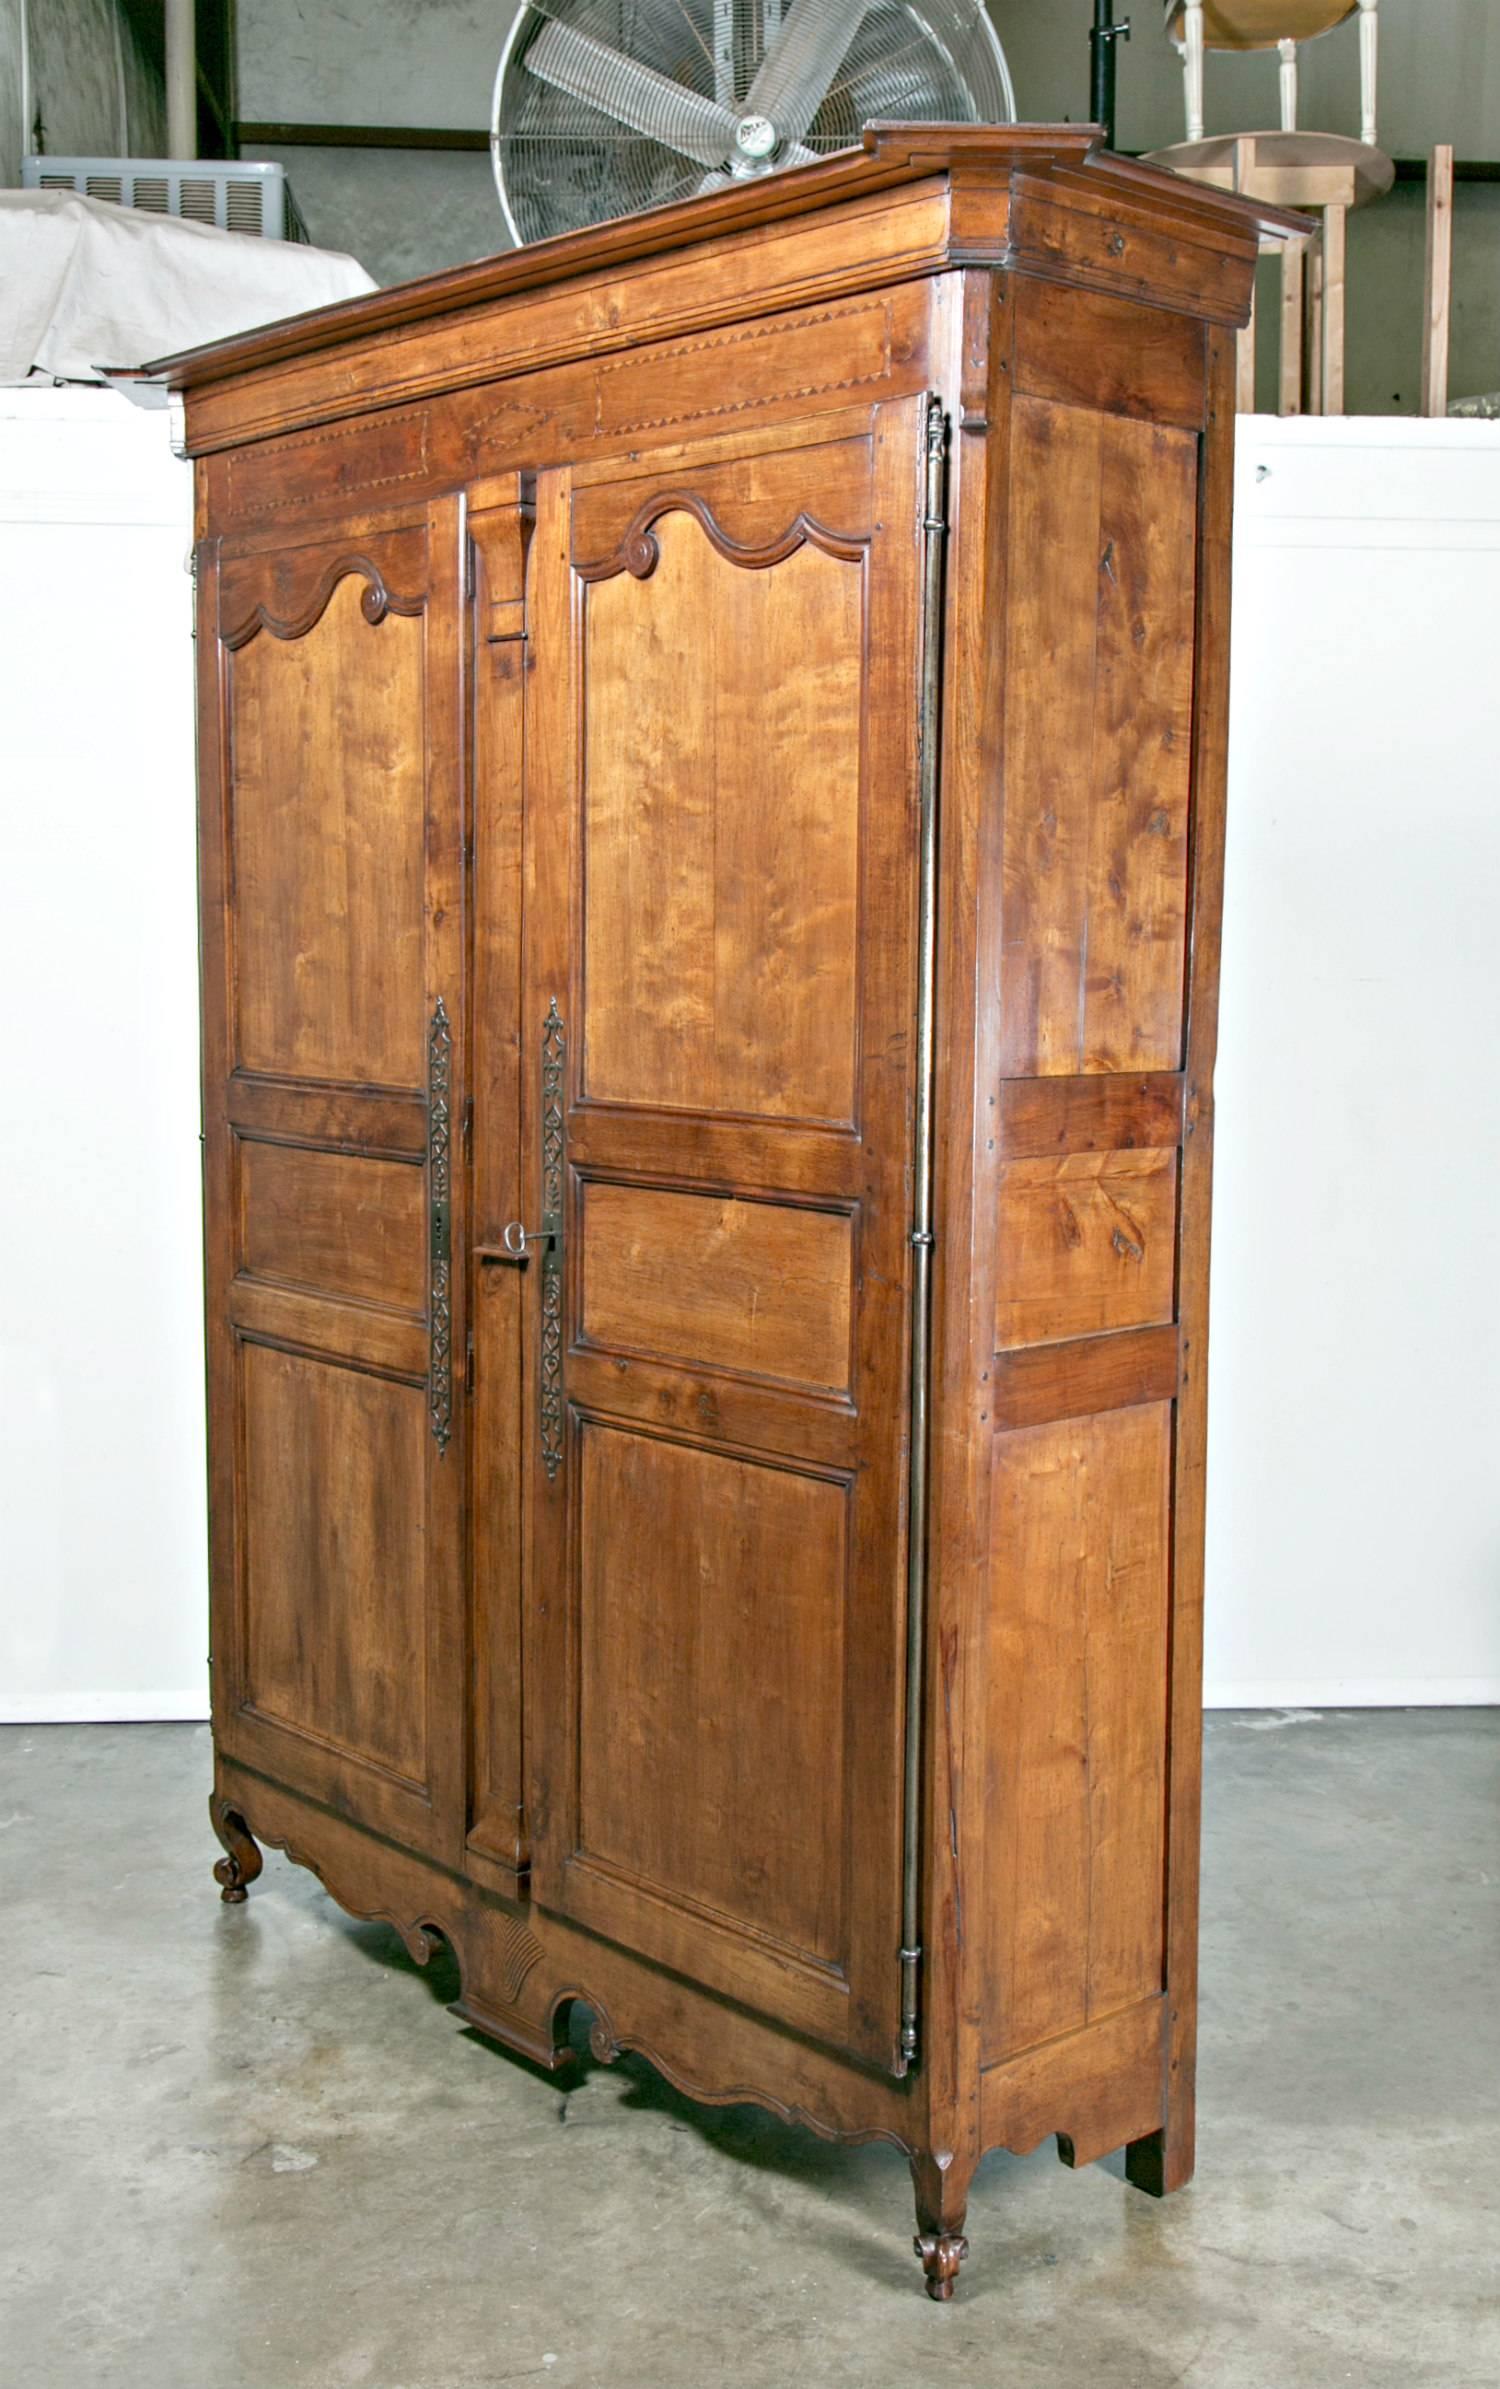 Monumental 18th century Louis XV period carved armoire handcrafted of wild cherrywood by highly skilled rural artisans, having an ogee canted corner crown above a fruitwood inlaid frieze. The triple paneled doors, separated by a relief pilaster,